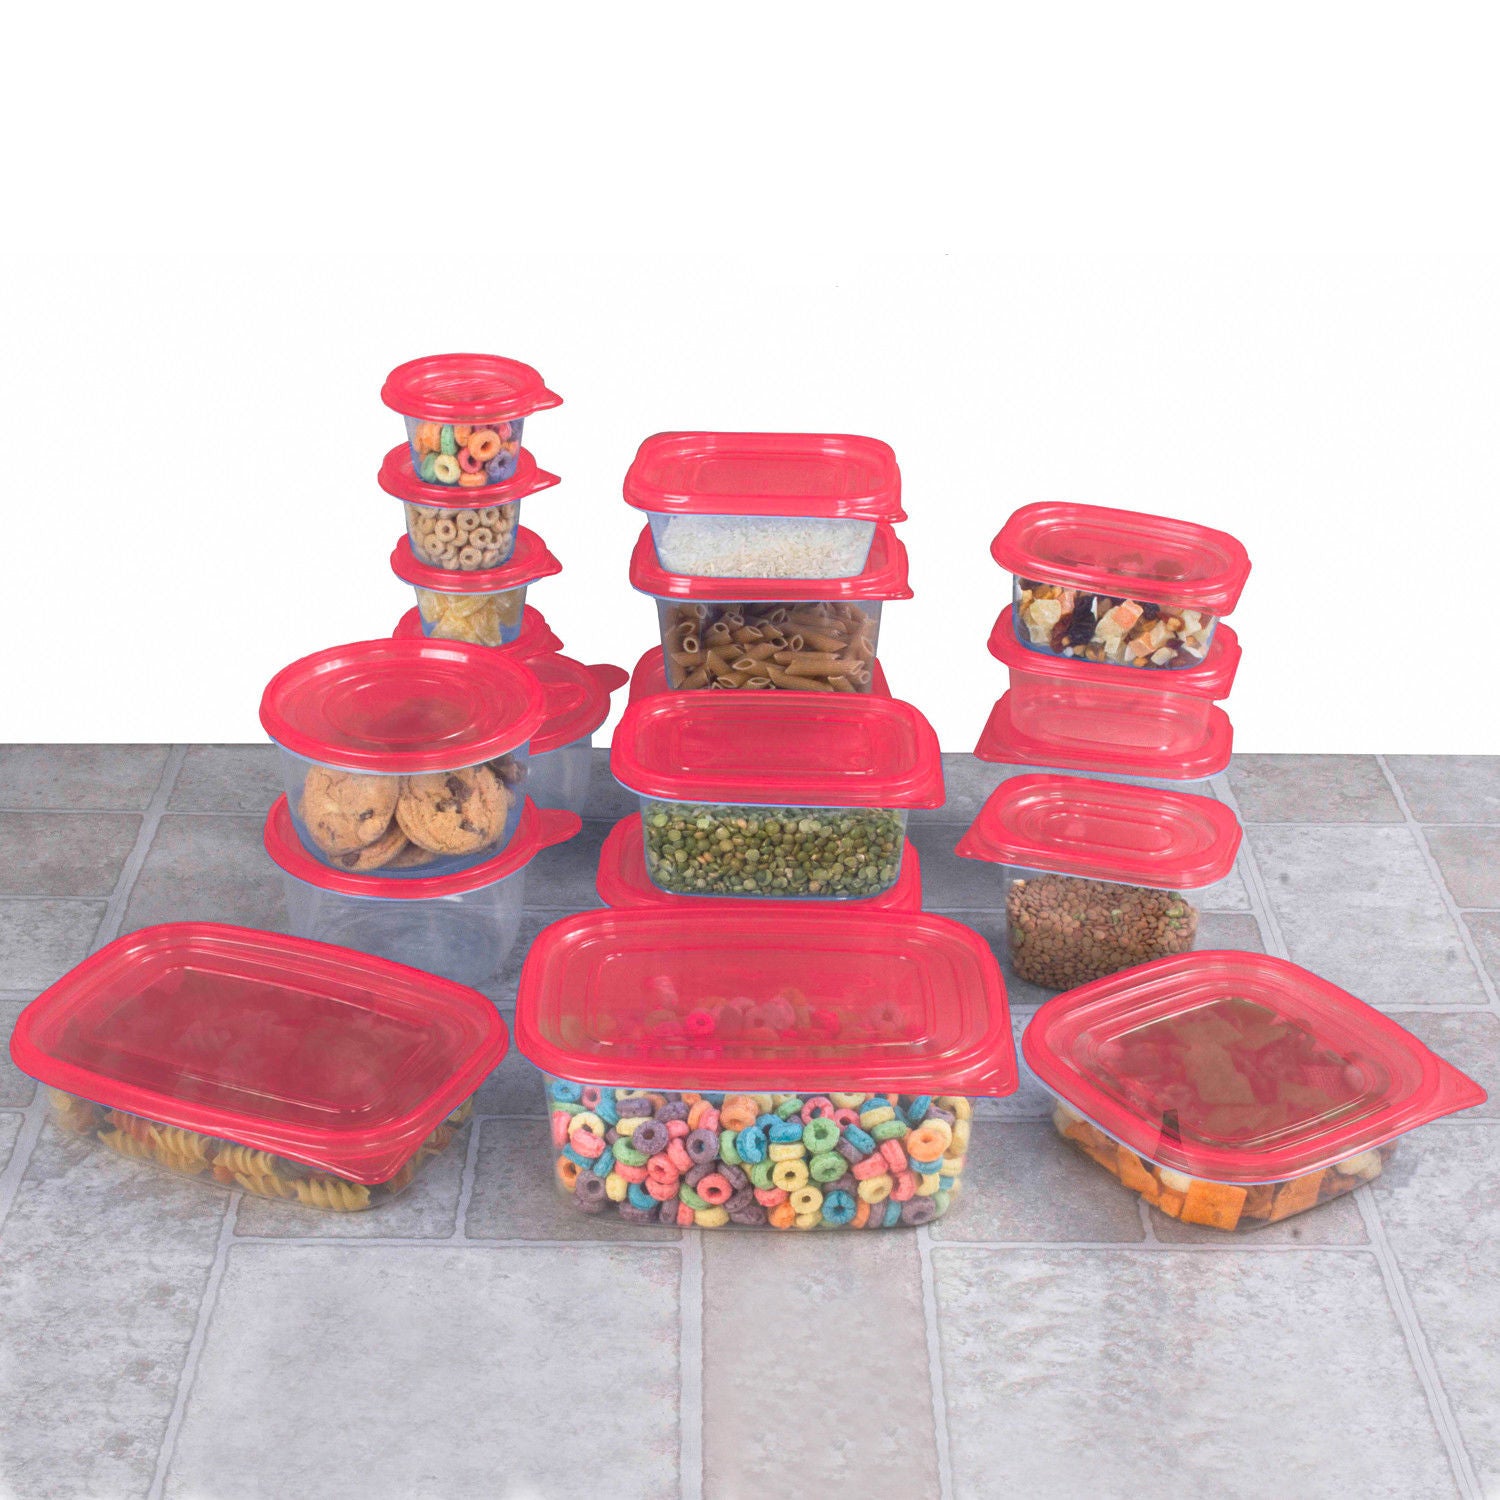 58 Piece Plastic Food Container Set - 29 Plastic Storage Containers with Air Tight Lids Red